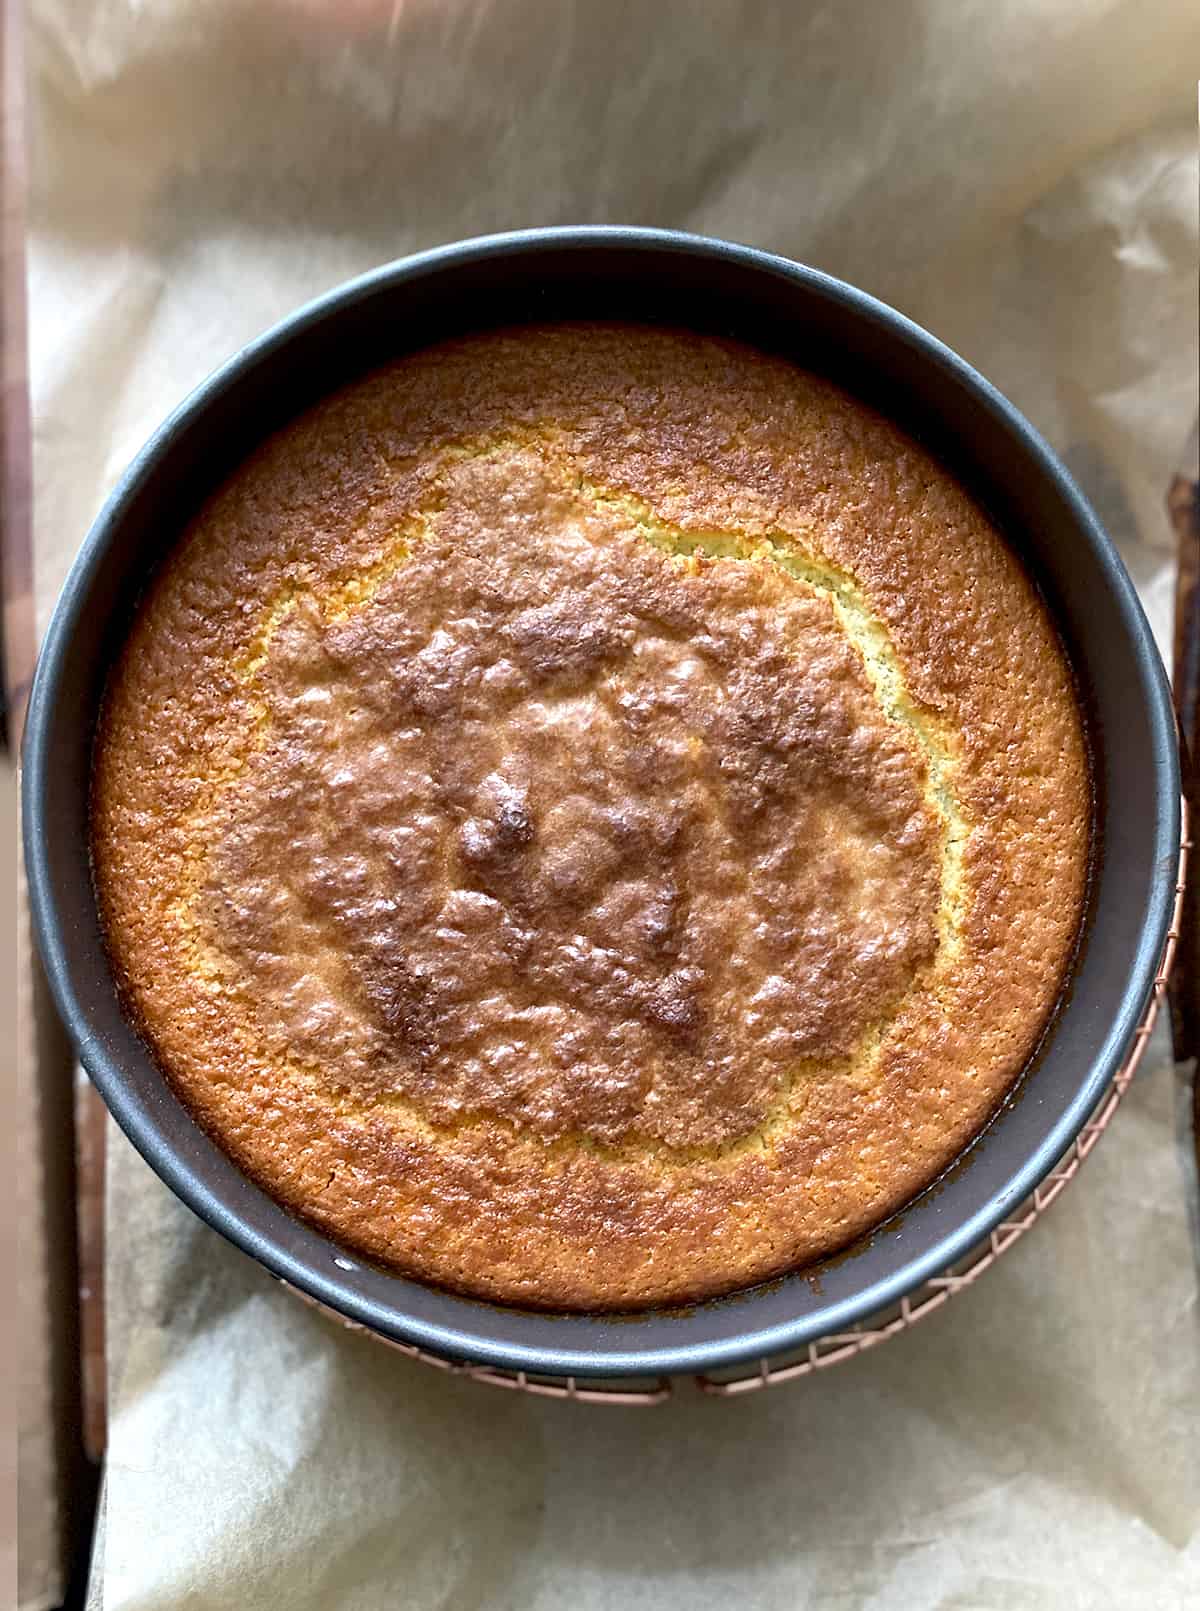 A baking pan with baked cake on a paper lined baking sheet.